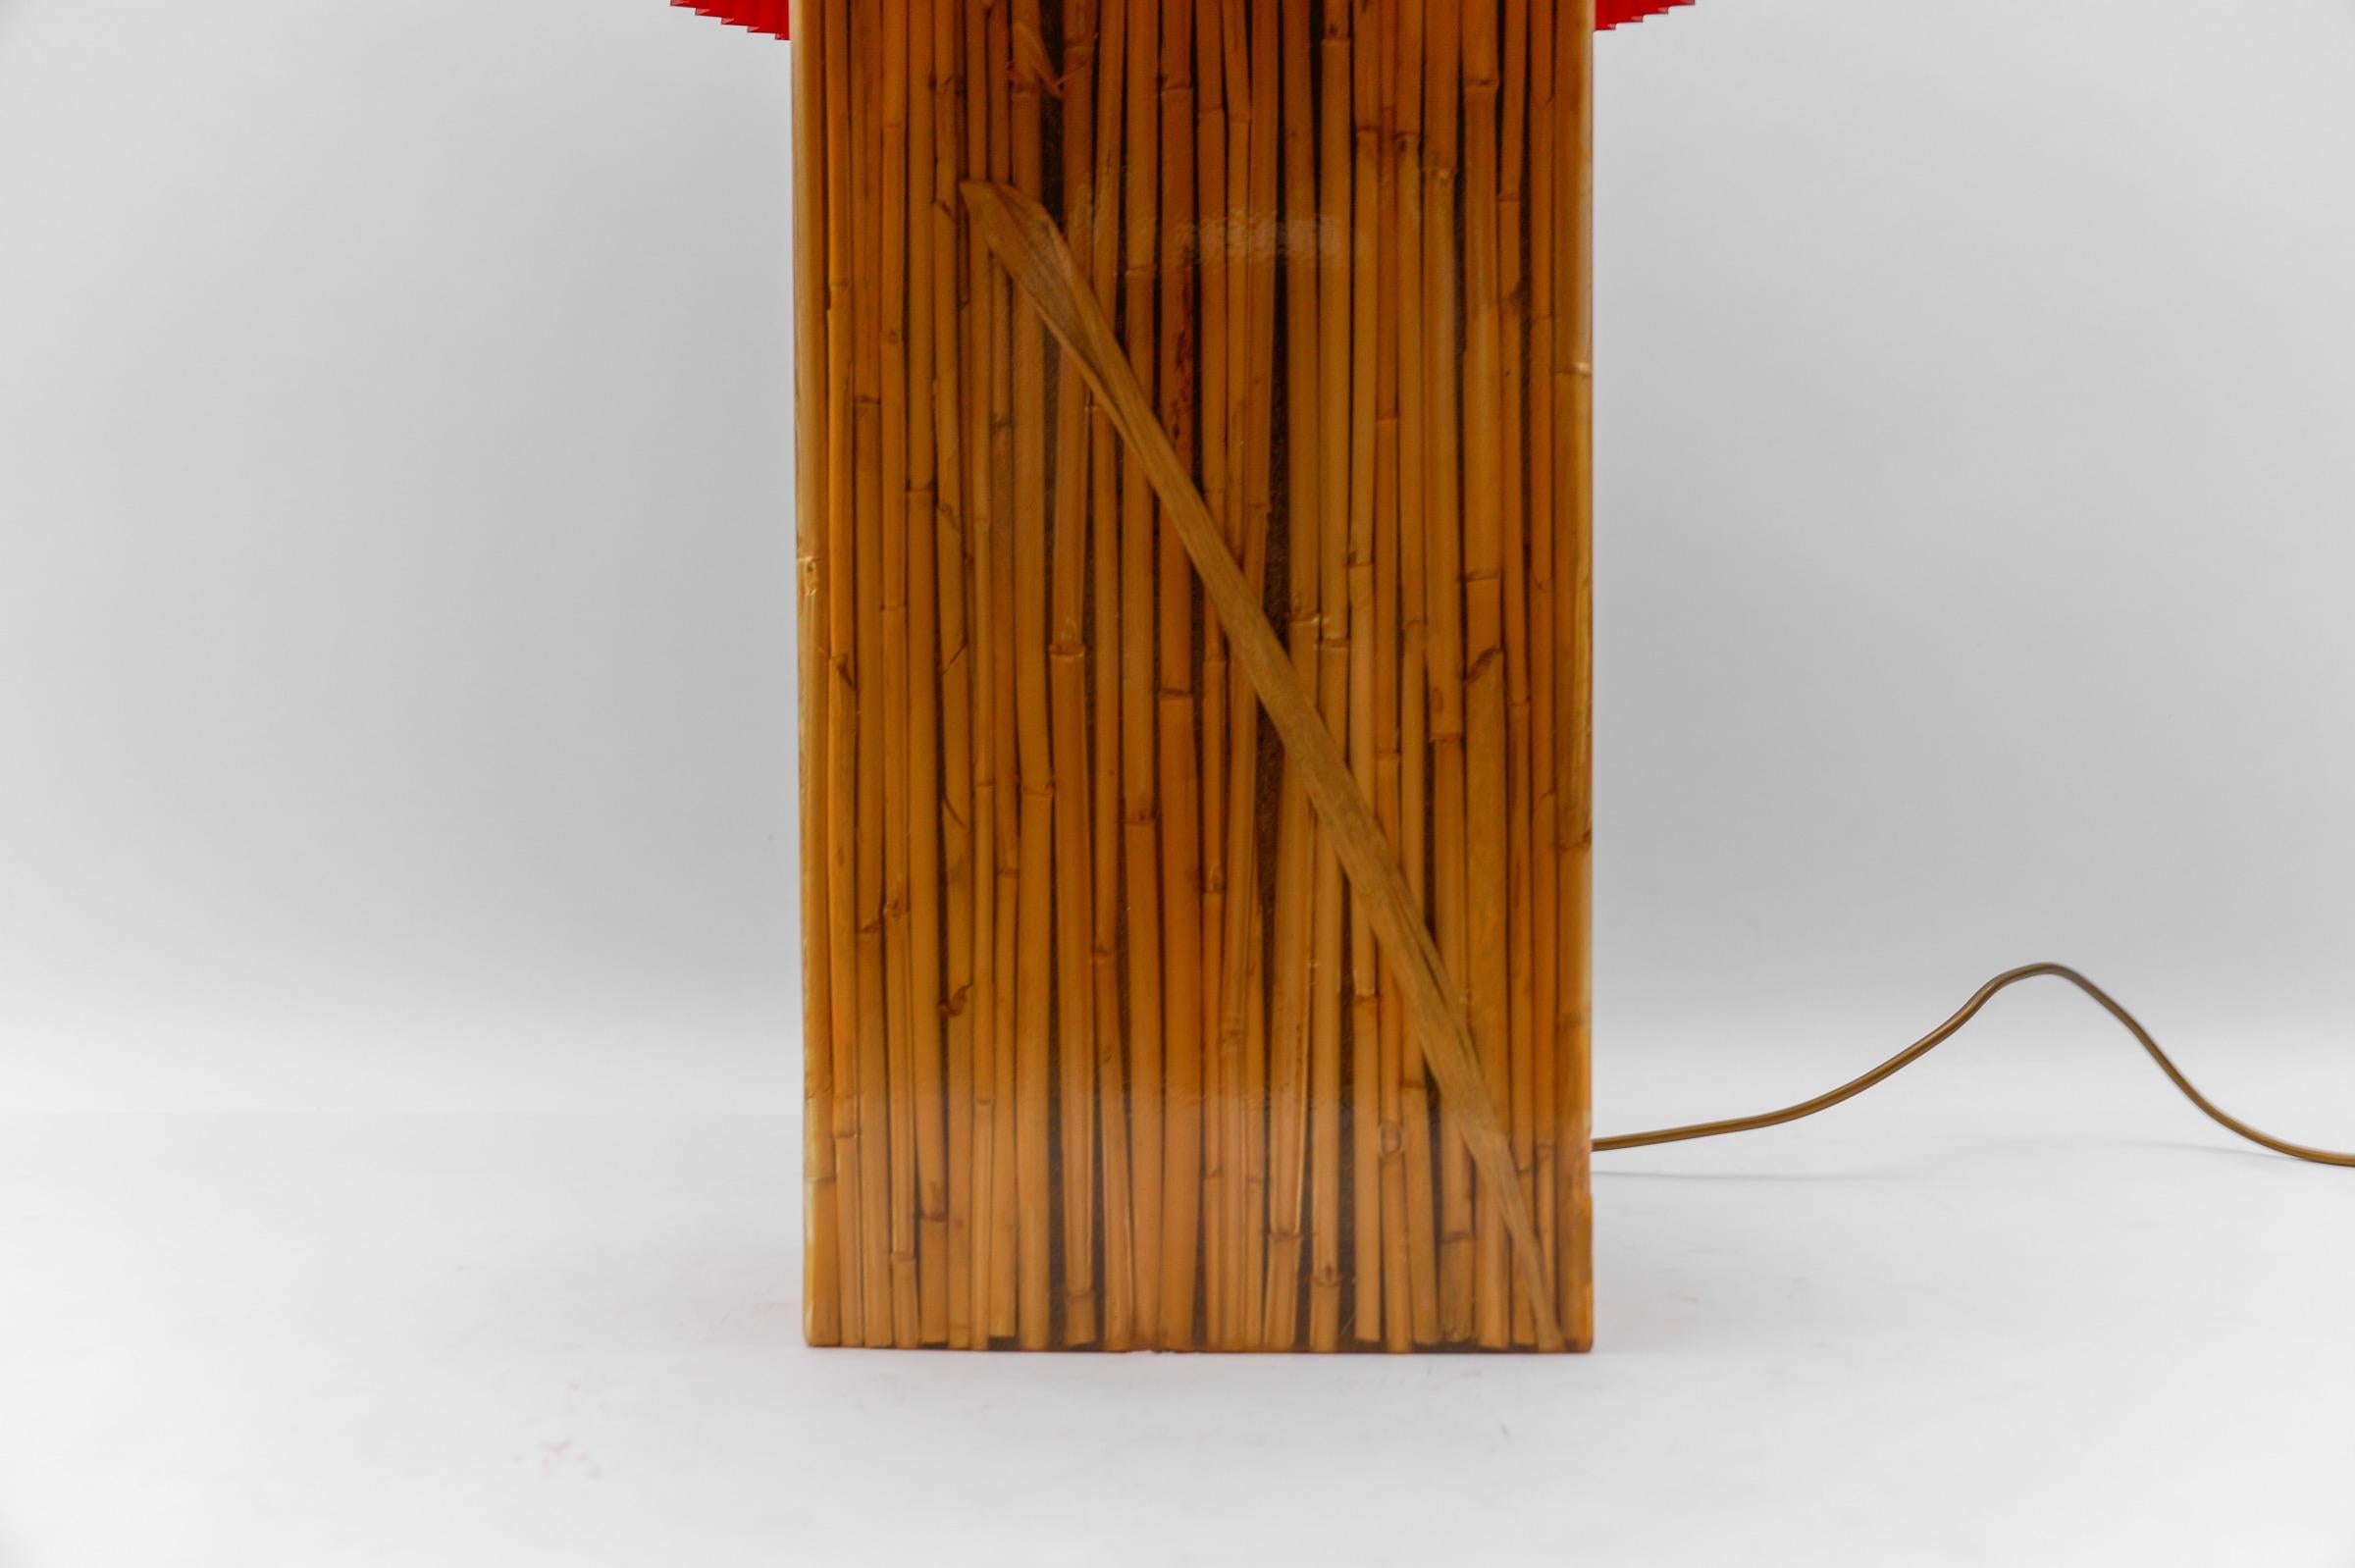 Large Riccardo Marzi Bamboo Resin Table Lamp, 1970s Italy For Sale 4